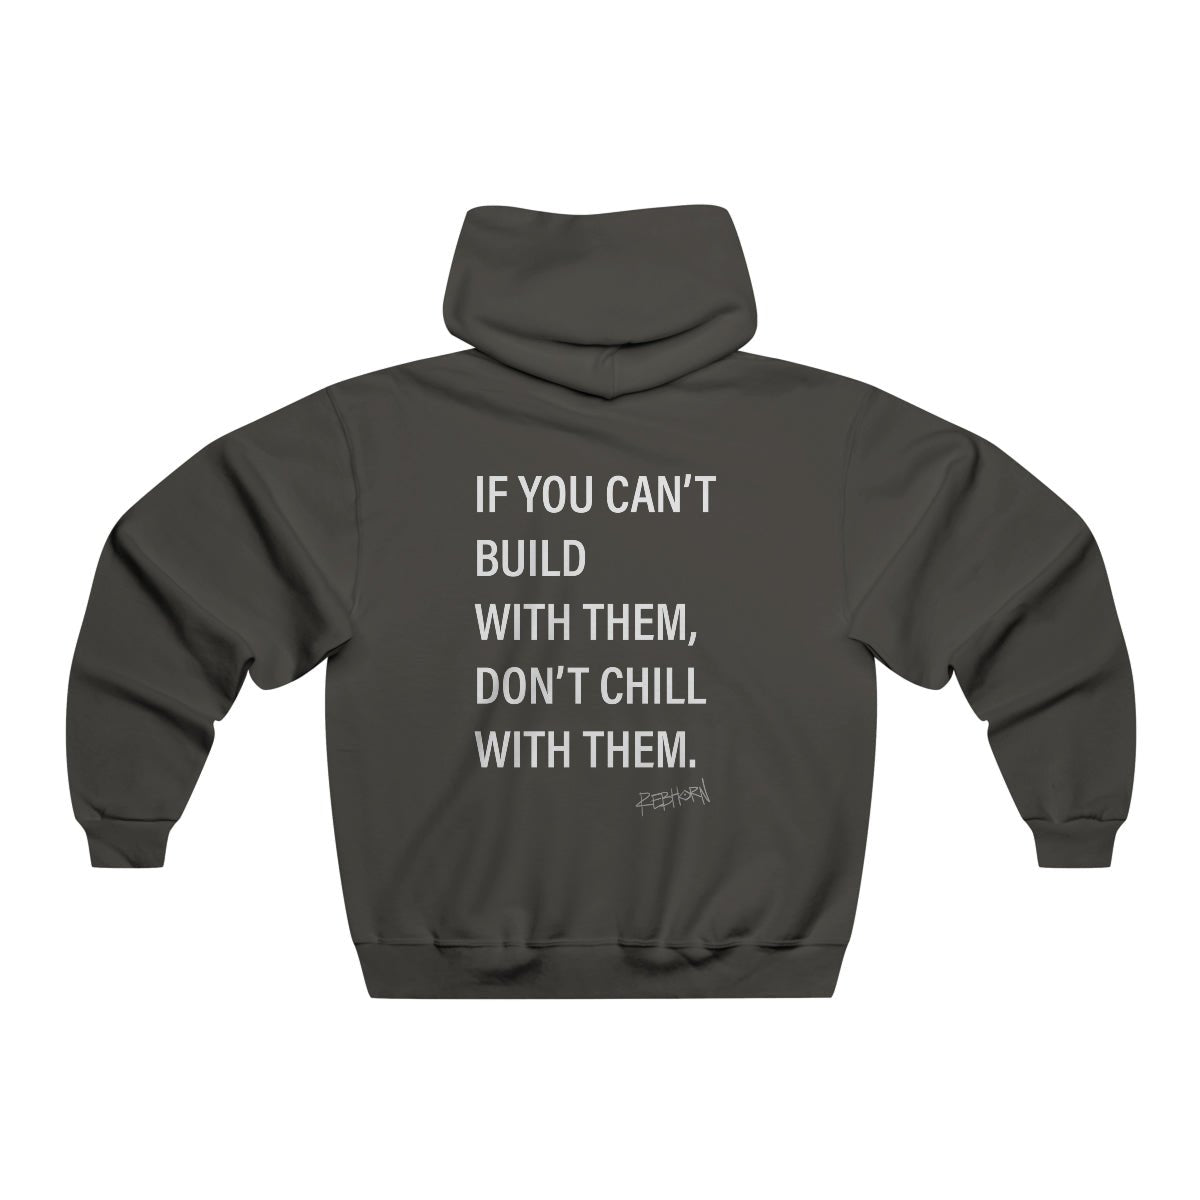 If You Can't Build With Them Don't Chill With Them Hooded Sweatshirt - REBHORN DESIGN